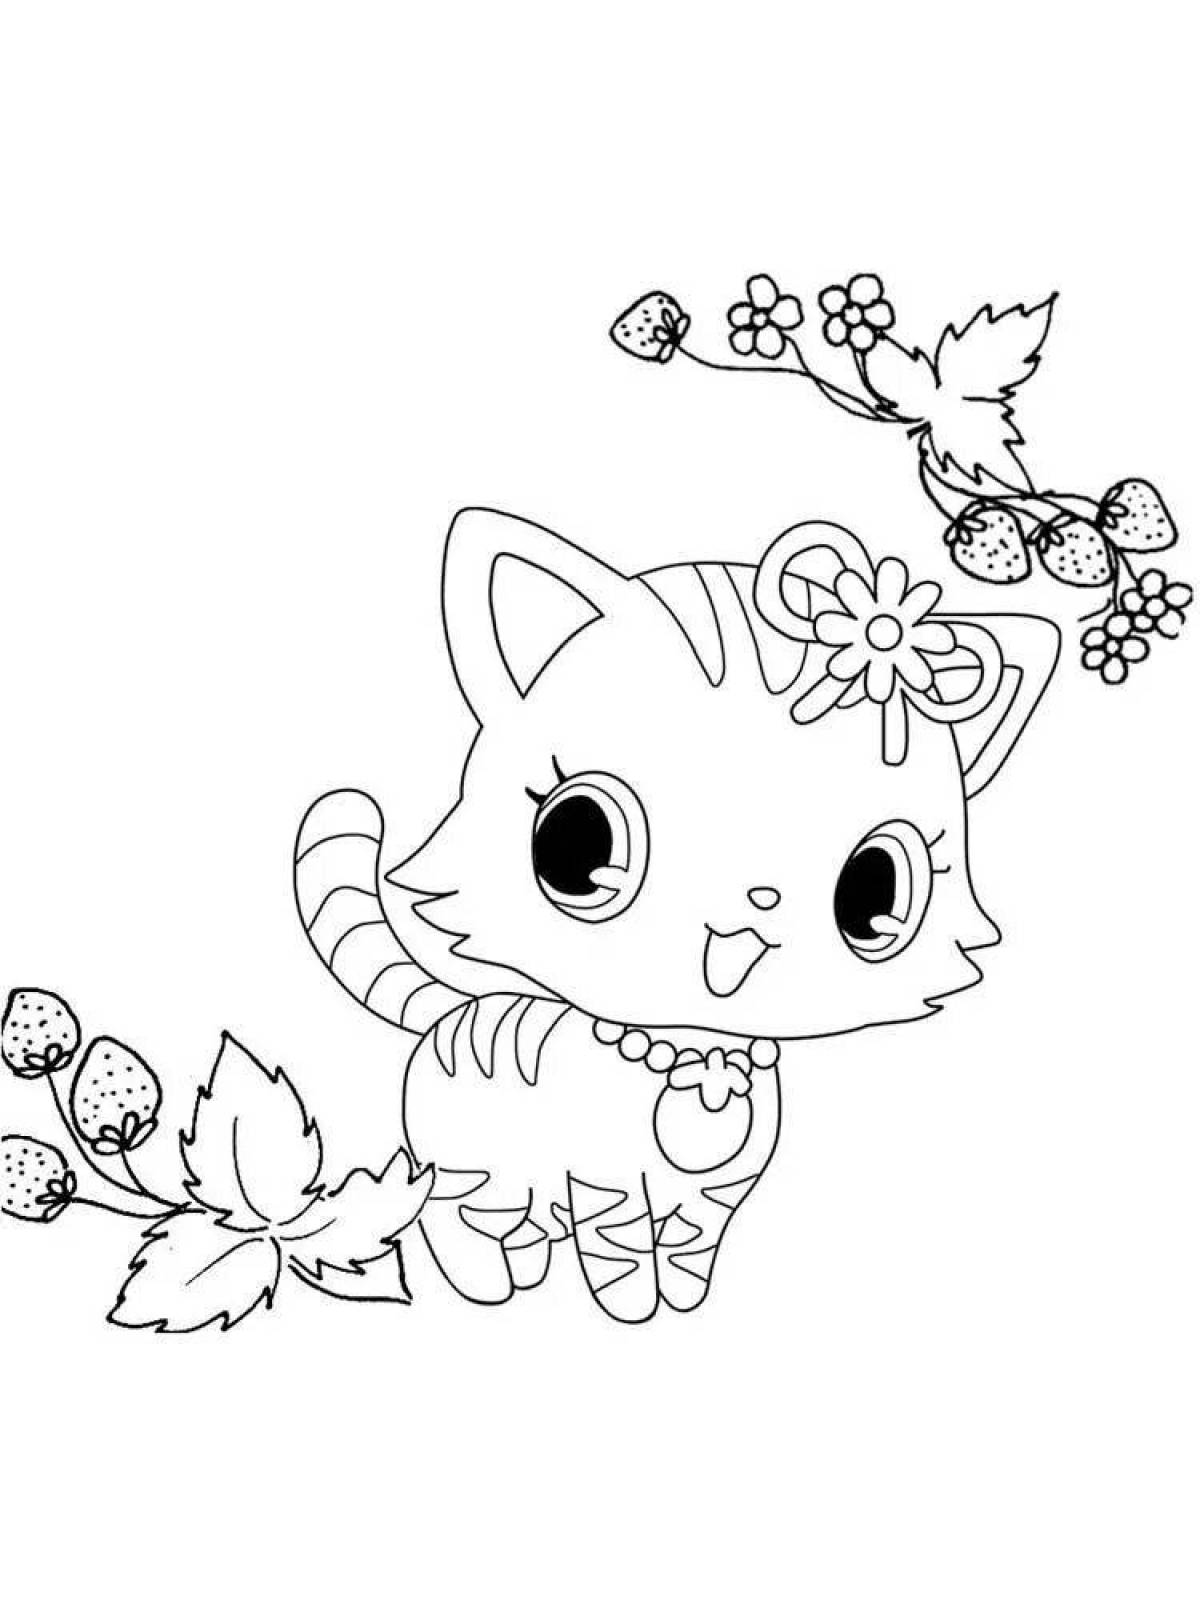 Live coloring of cute animals for girls